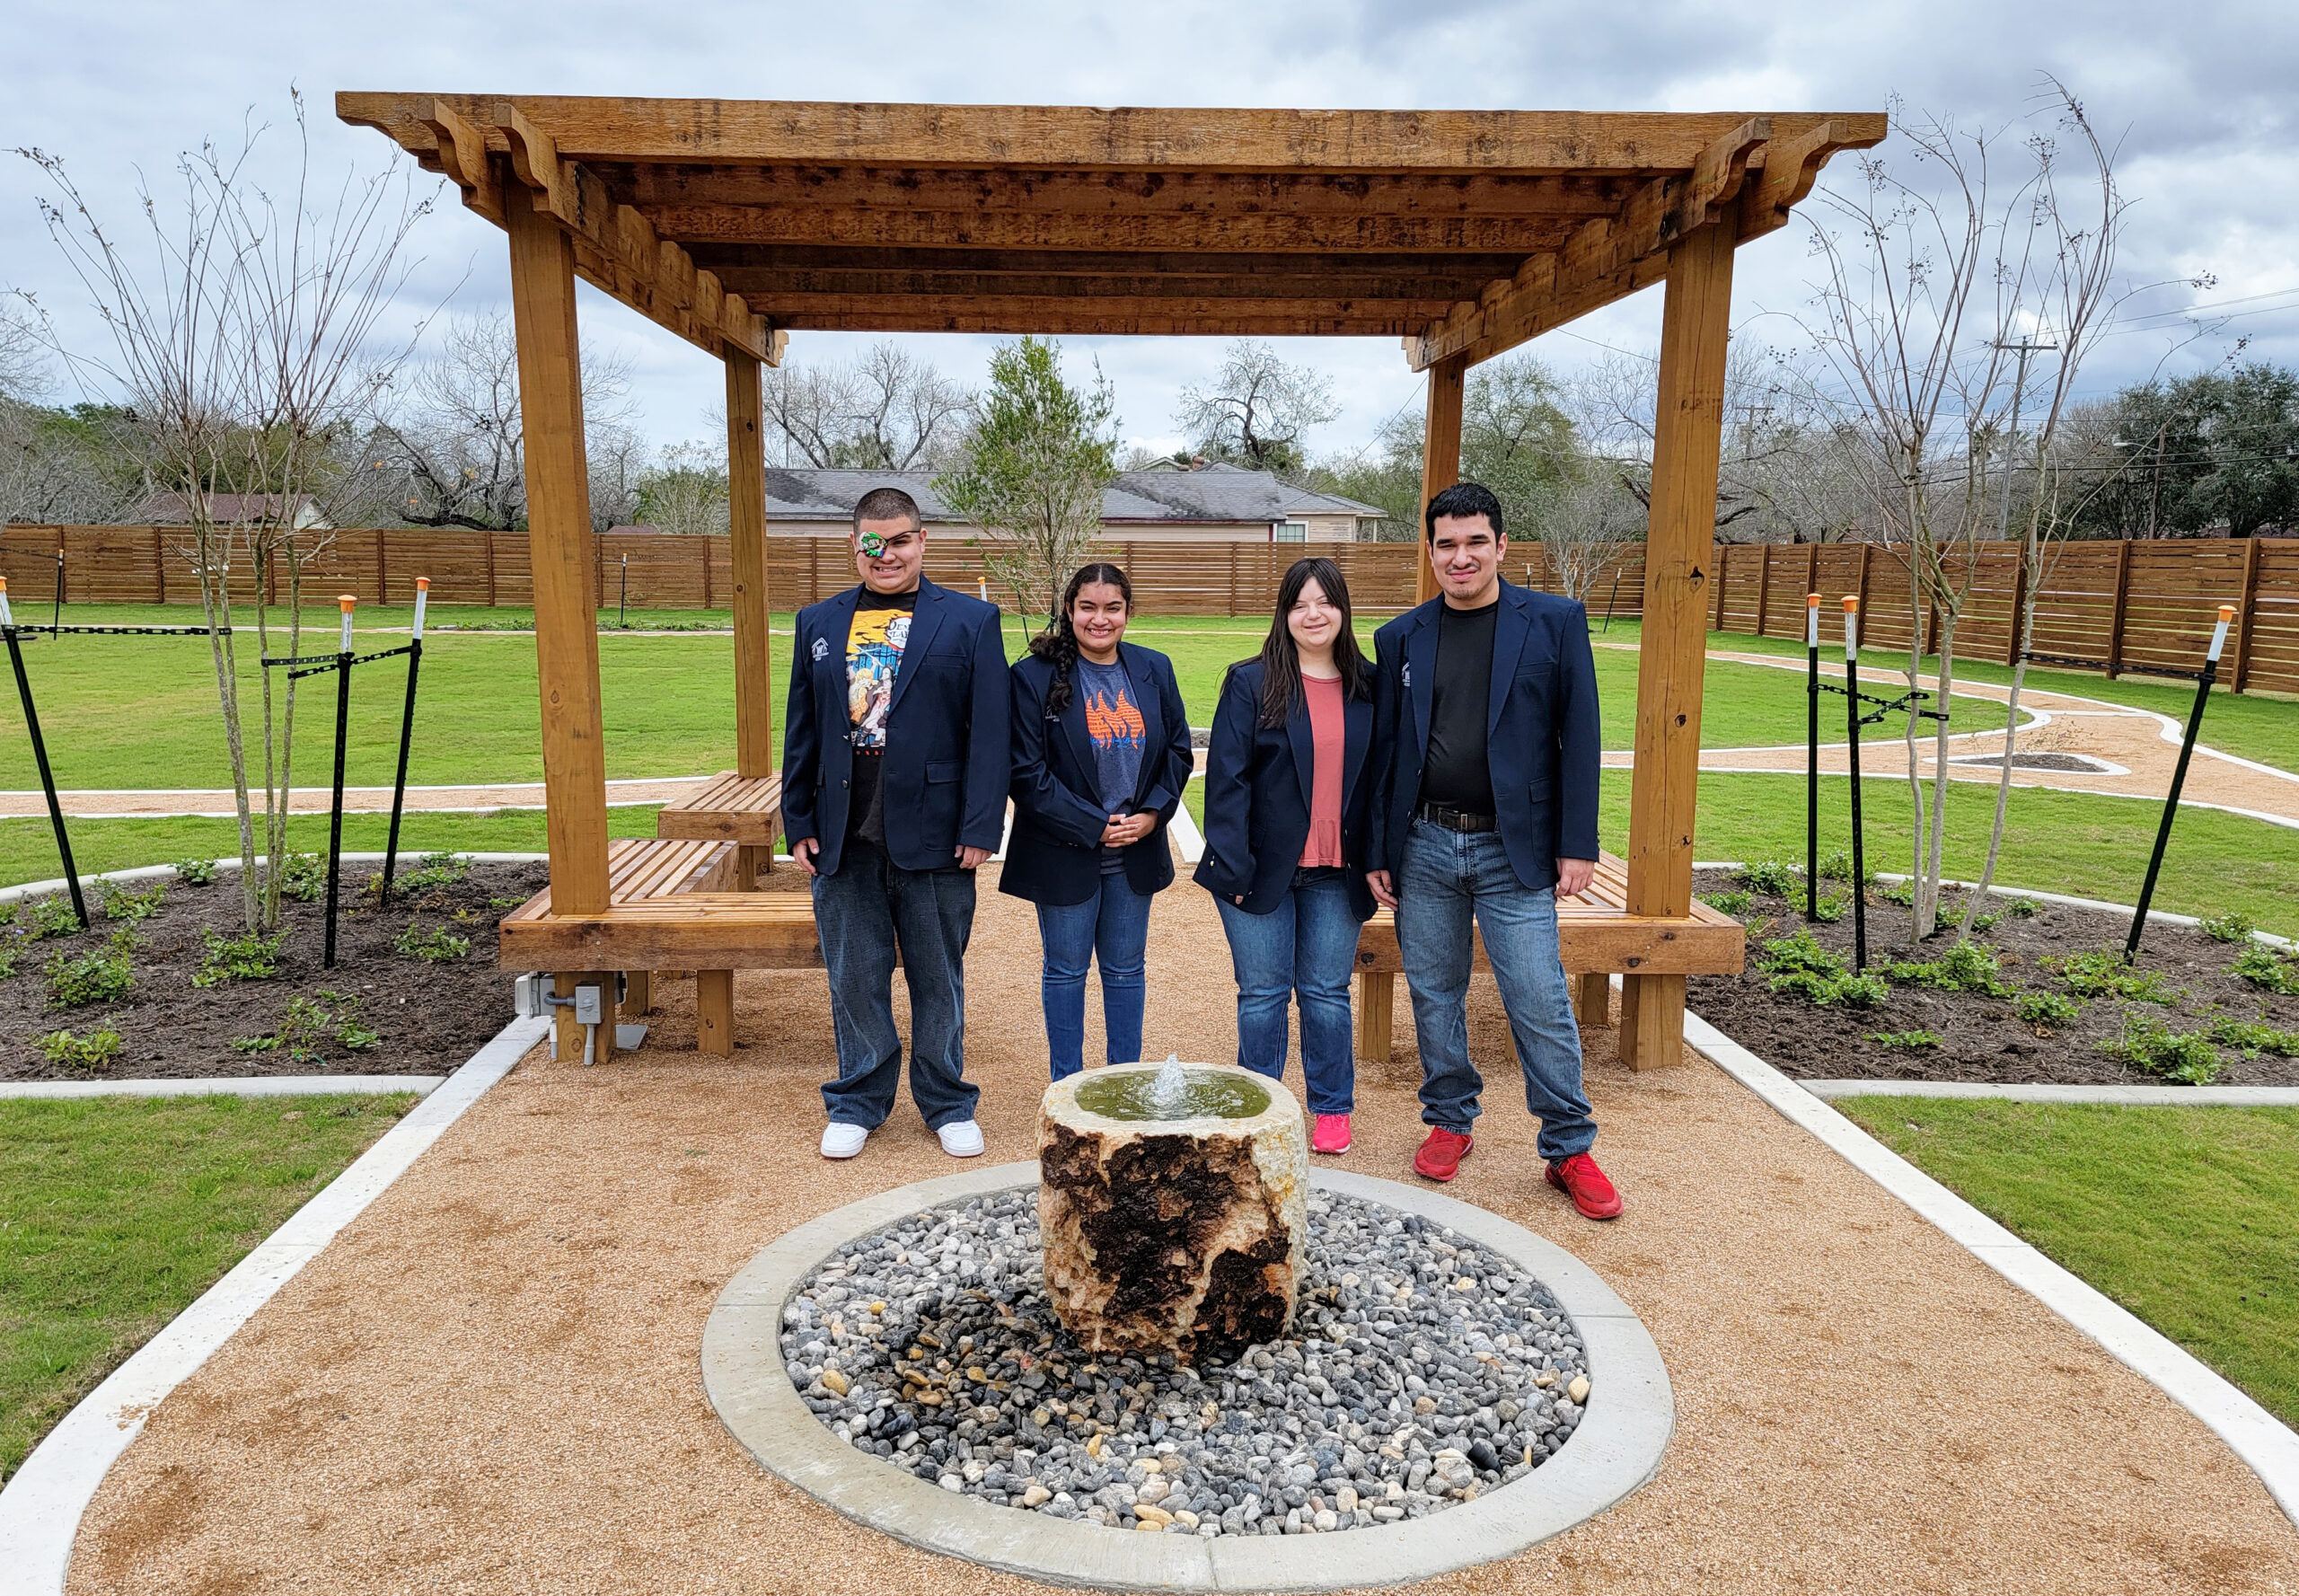 HAEF provides a dream backyard for the Transition Academy